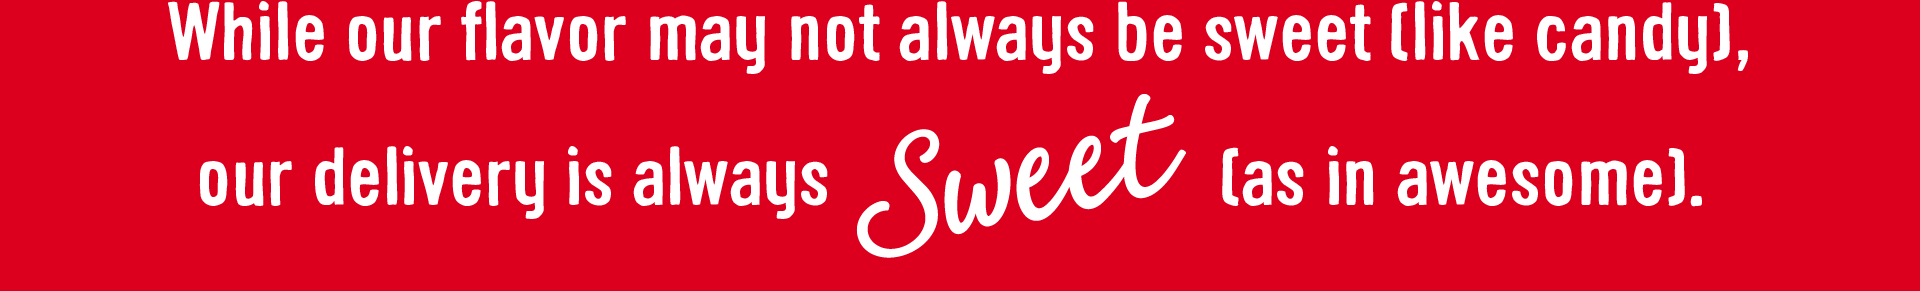 While our flavor may not always be sweet (like candy), our delivery is always Sweet (as in awesome).